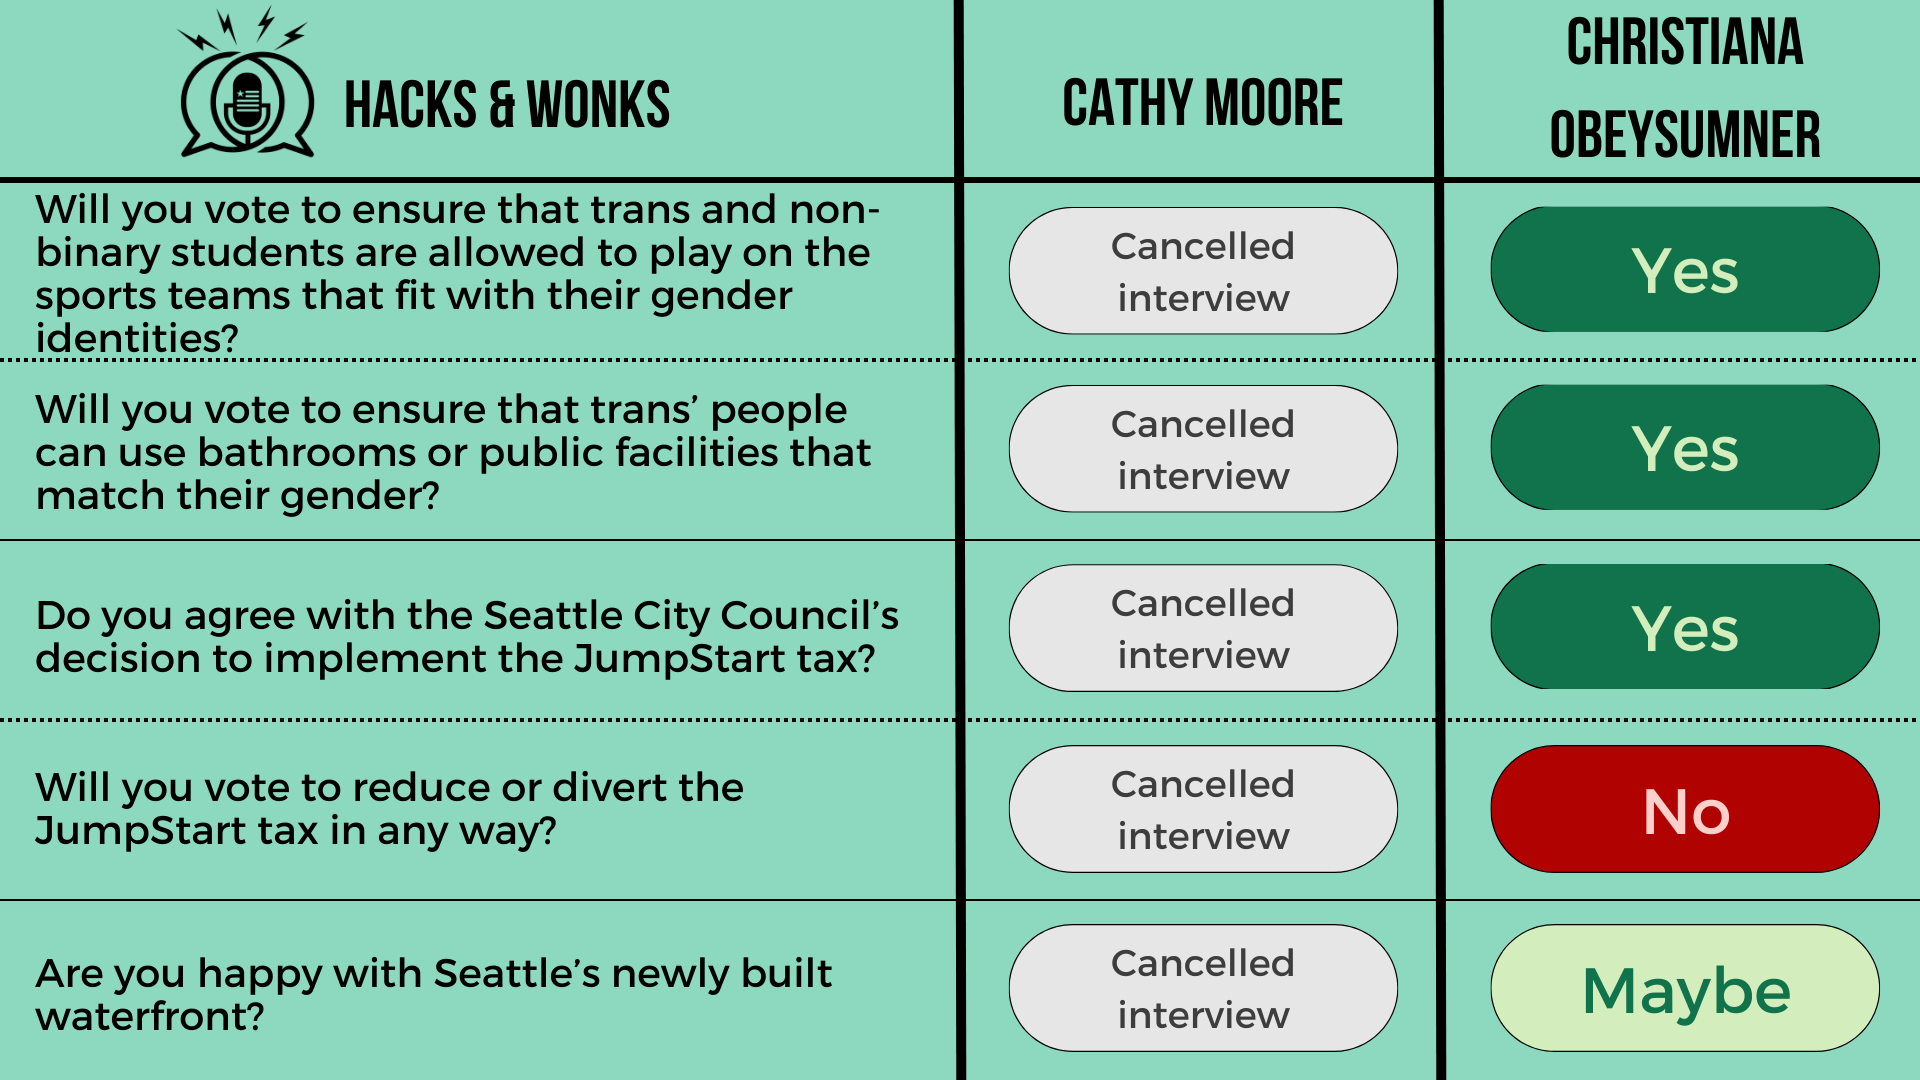 Q: Will you vote to ensure that trans and non-binary students are allowed to play on the sports teams that fit with their gender identities? Cathy Moore: Cancelled interview, ChrisTiana ObeySumner: Yes  Q: Will you vote to ensure that trans’ people c